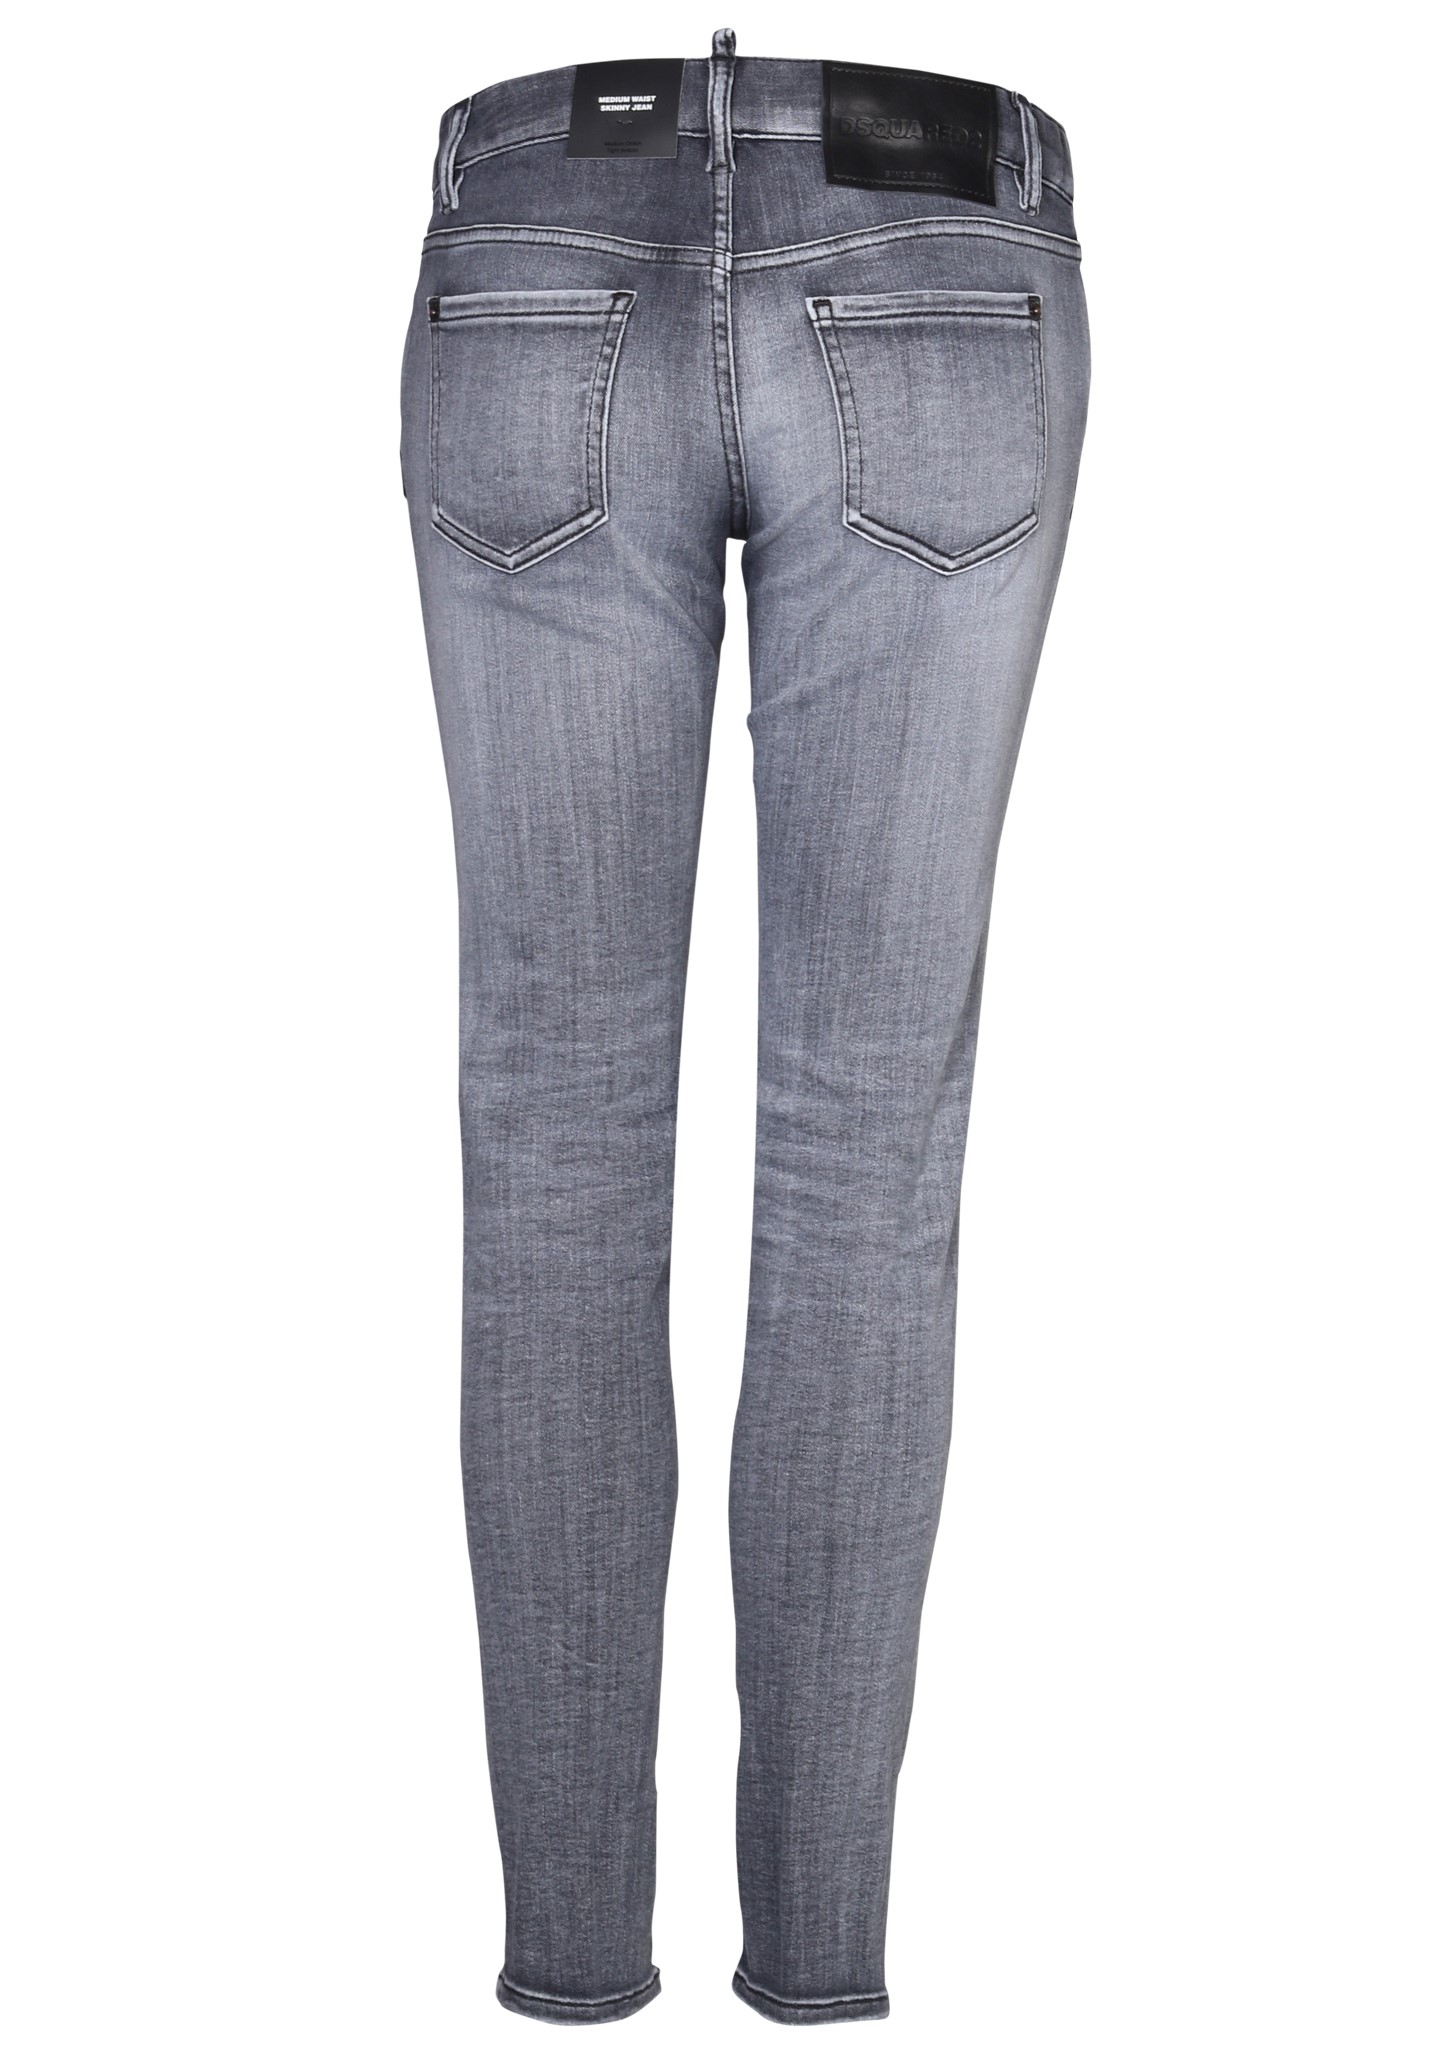 DSQUARED2 Medium Waist Skinny Jeans in Washed Grey